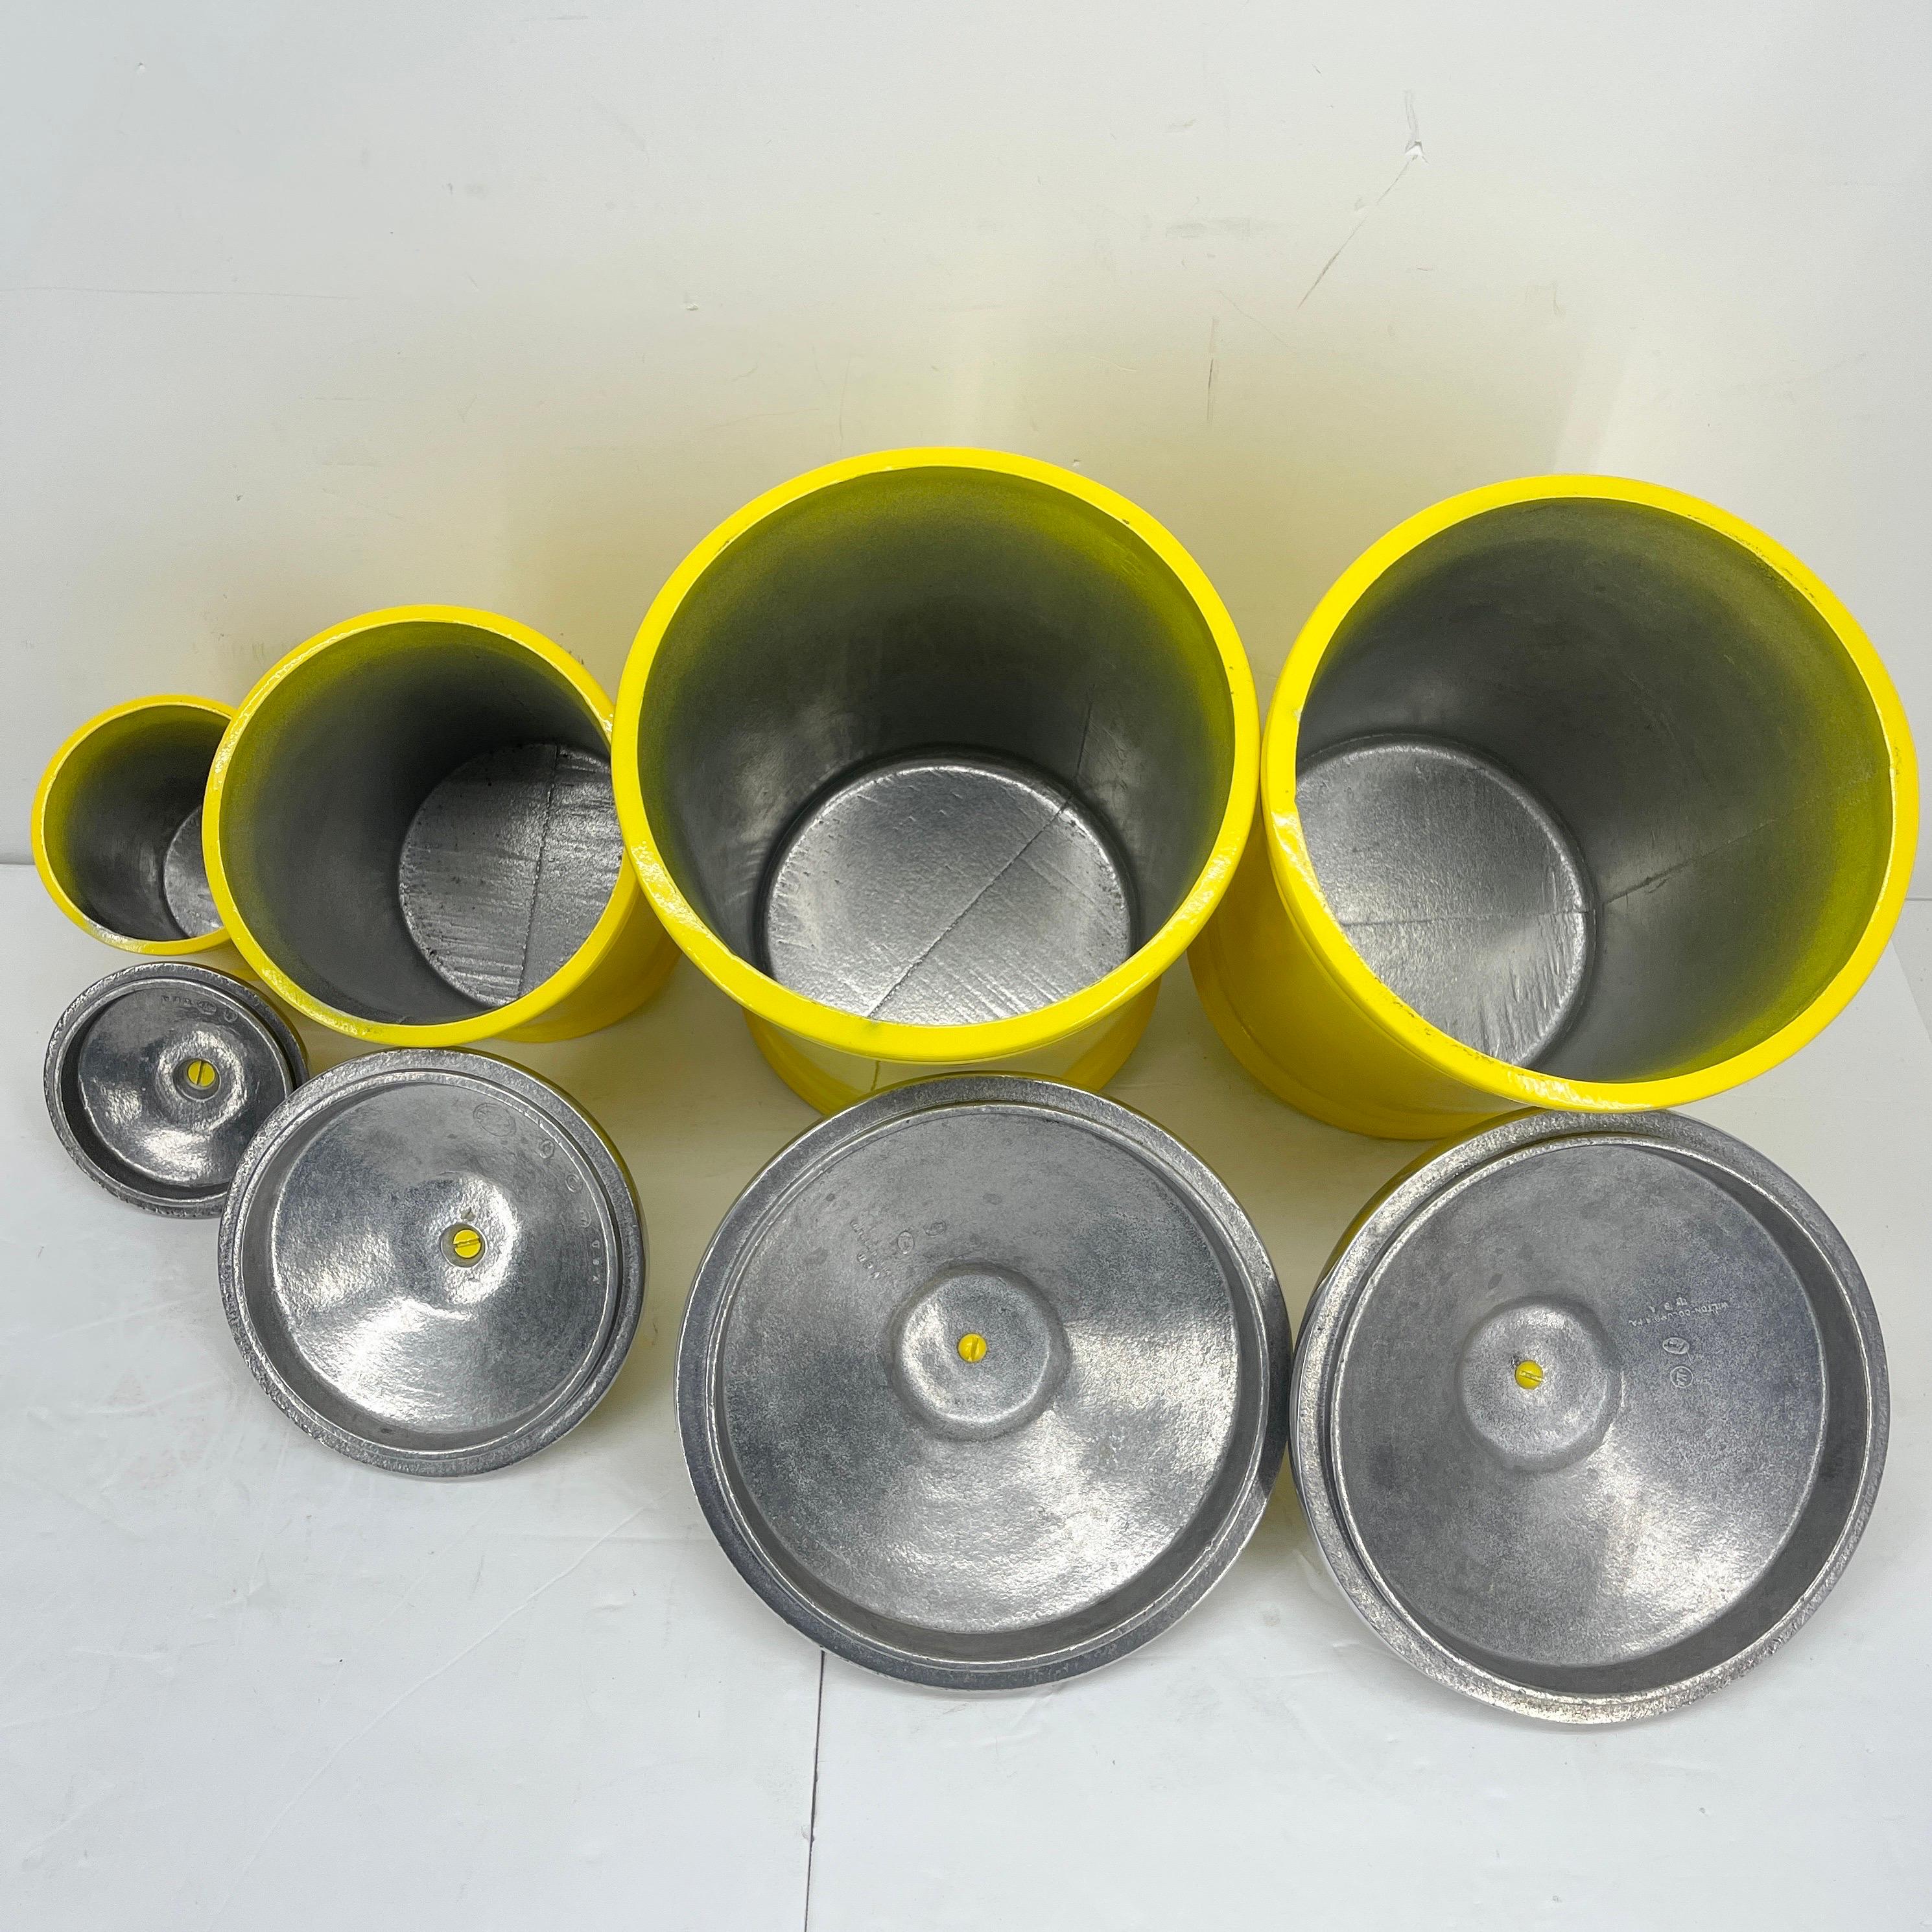 Vintage Kitchen or Bathroom Canister Jars Set, Bright Yellow Powder Coated 1